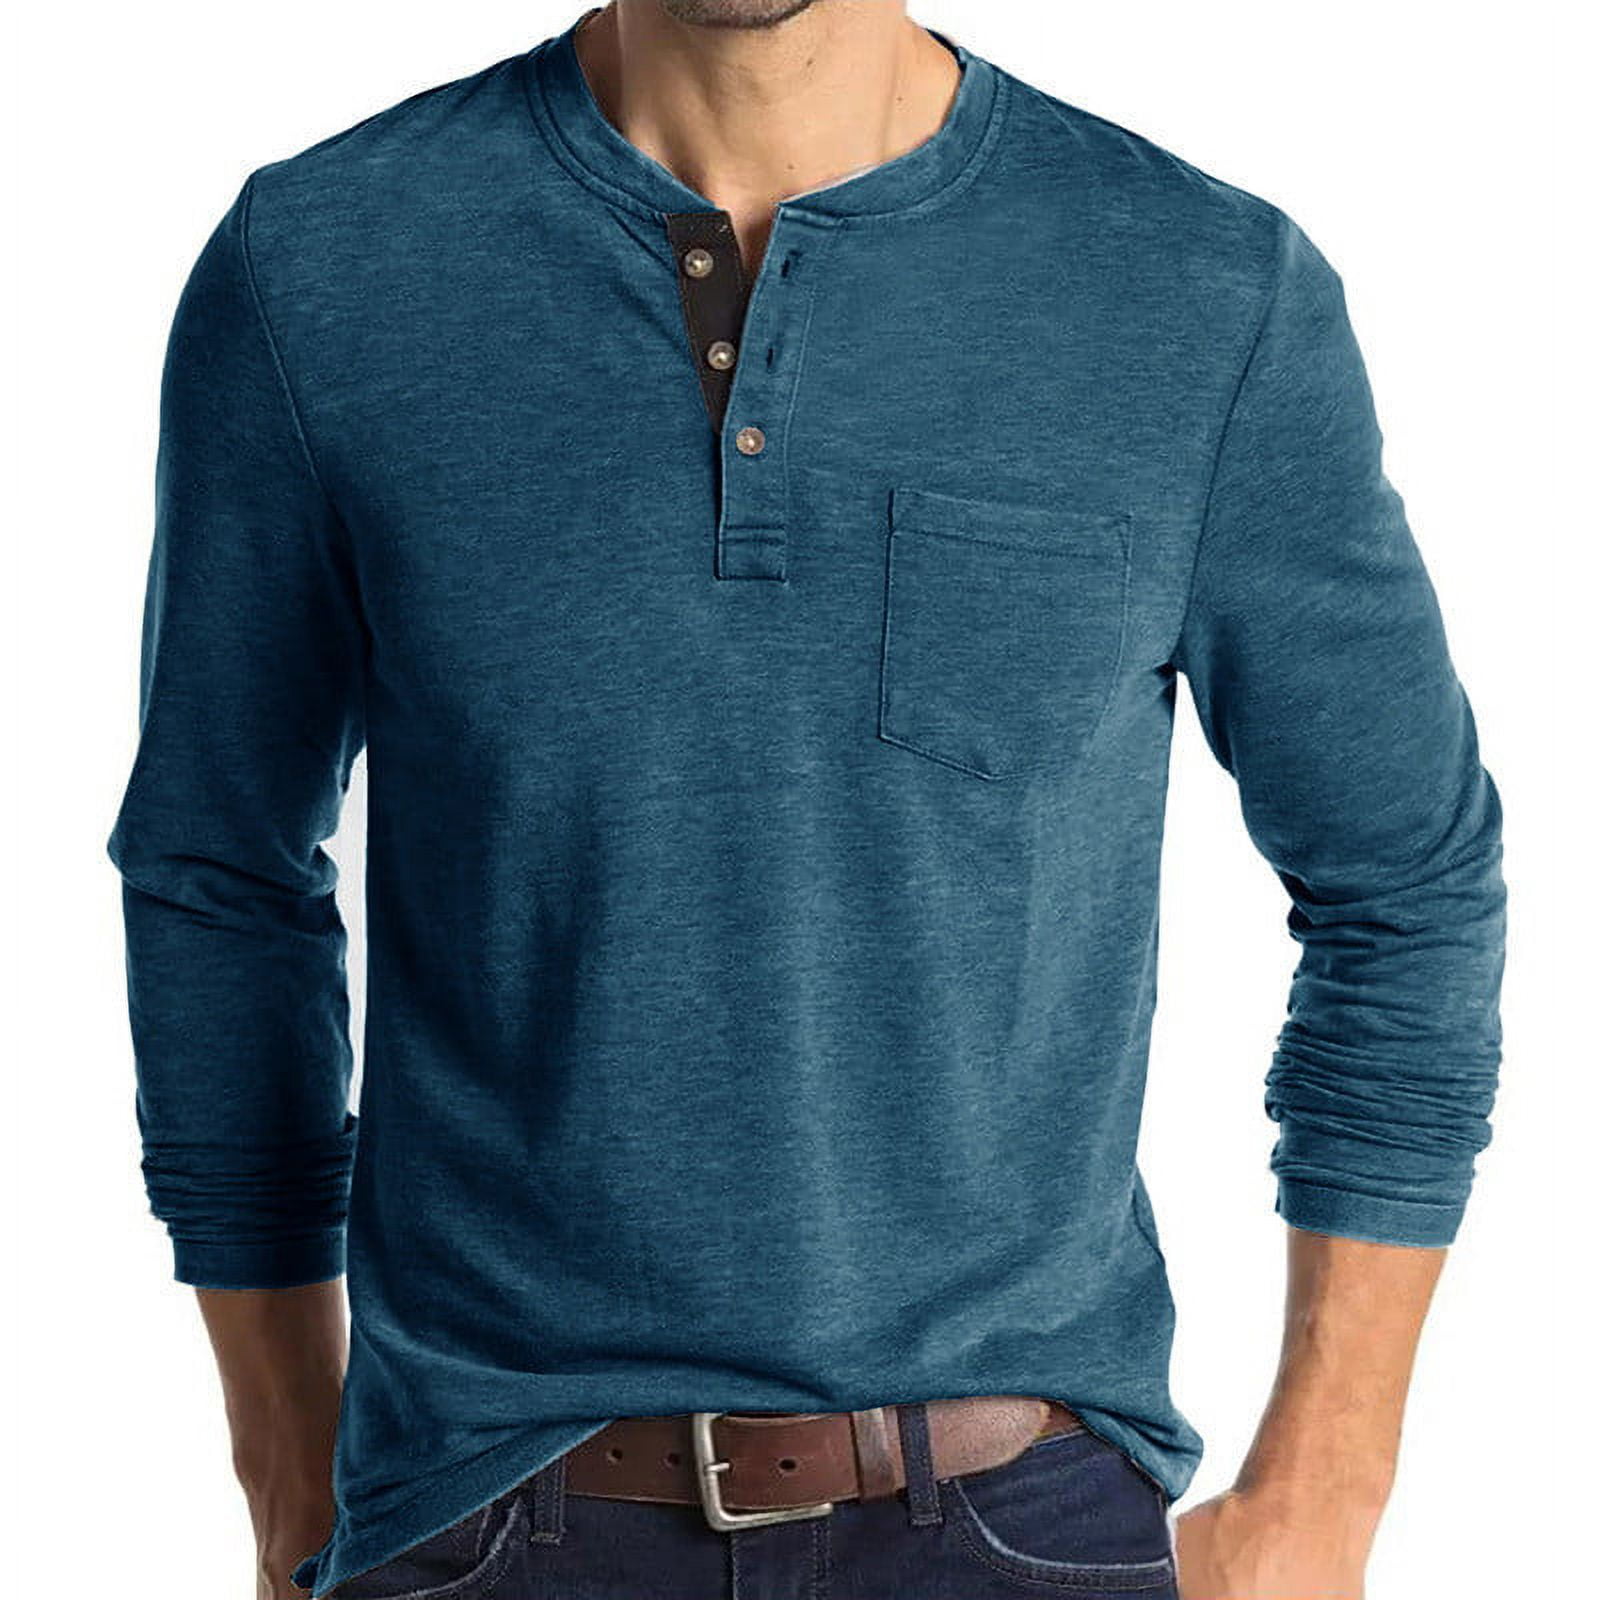 Men's Long Sleeves Henley Shirts Regular Fit Button Down Casual Cotton ...